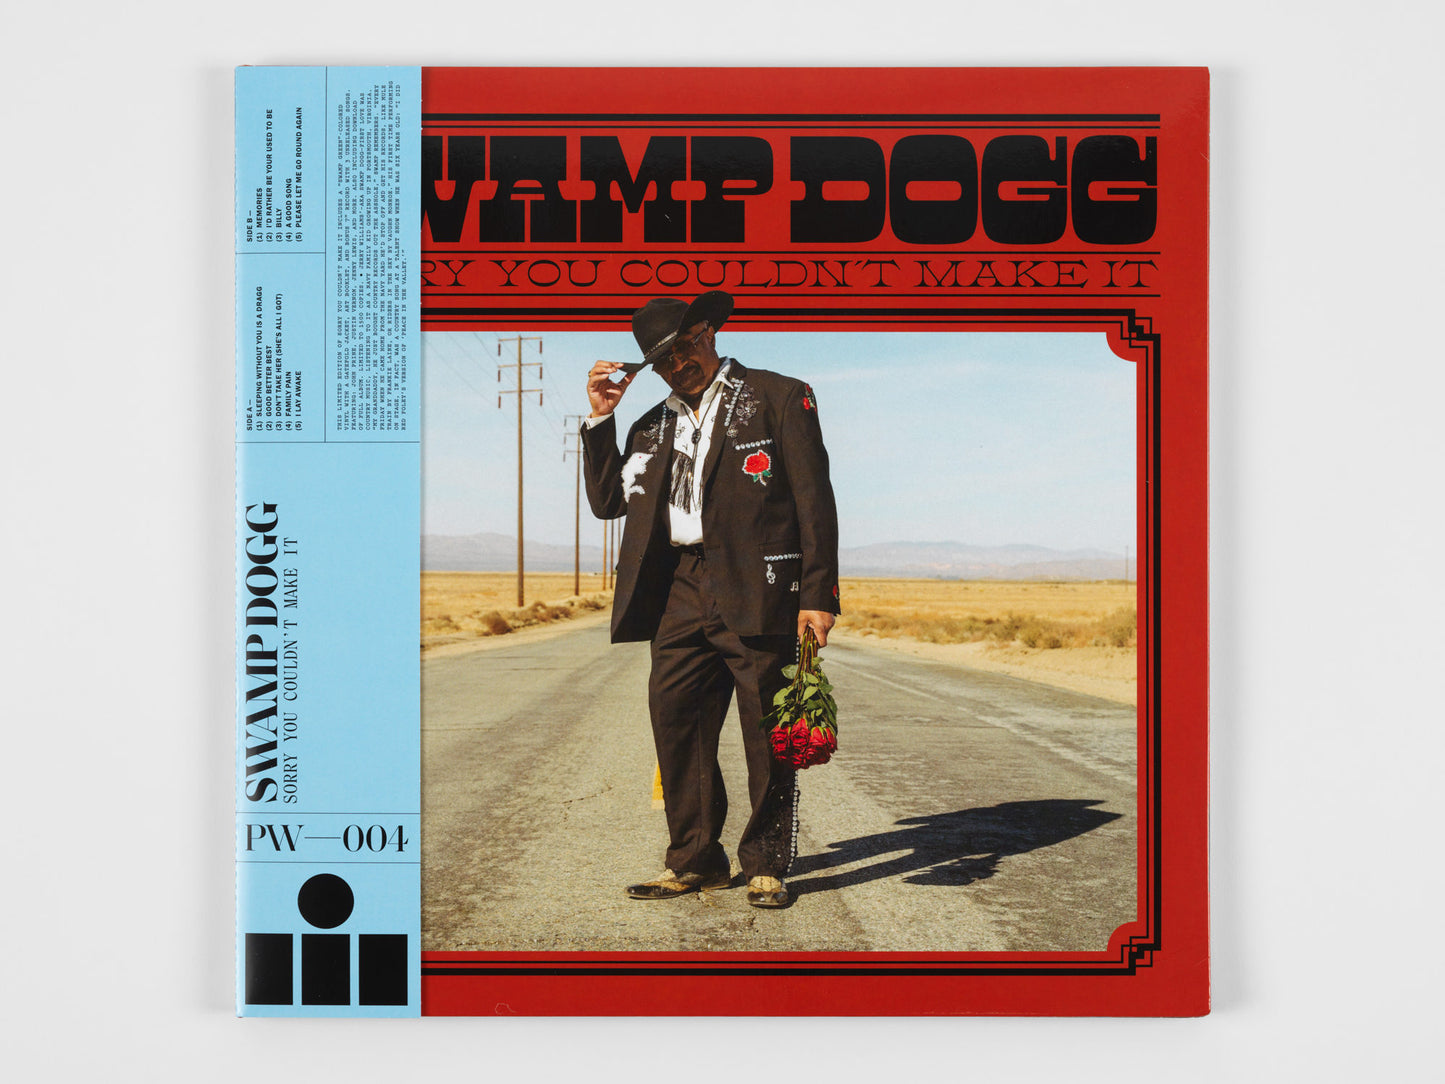 Swamp Dogg: Sorry You Couldn't Make It